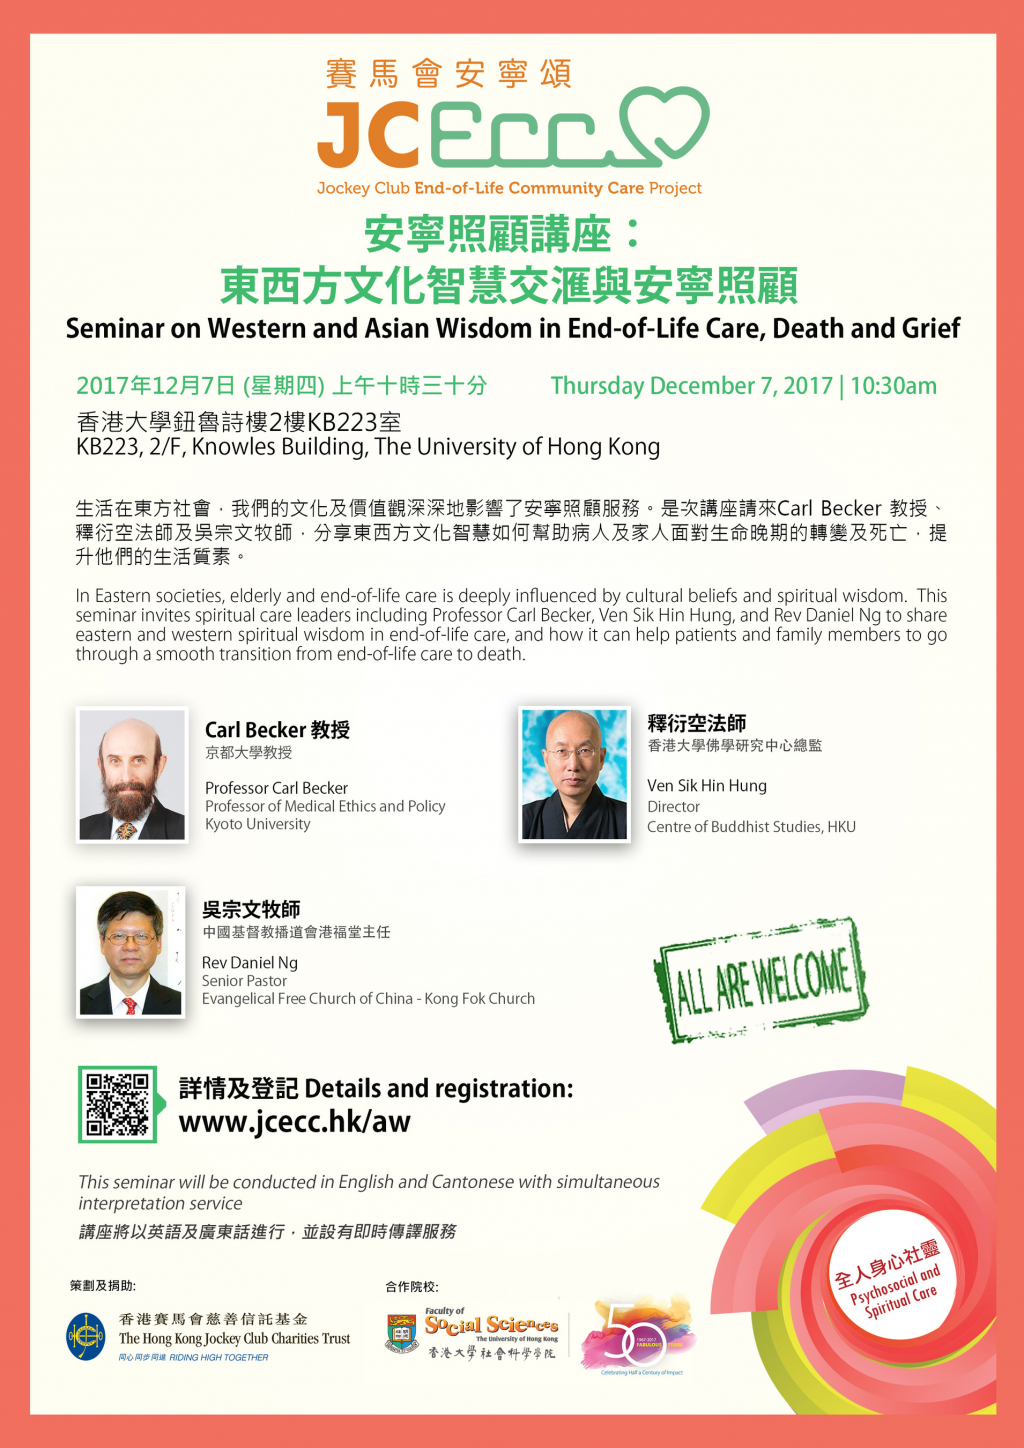 JCECC Seminar on Western and Asian Wisdom in End-of-Life Care, Death and Grief